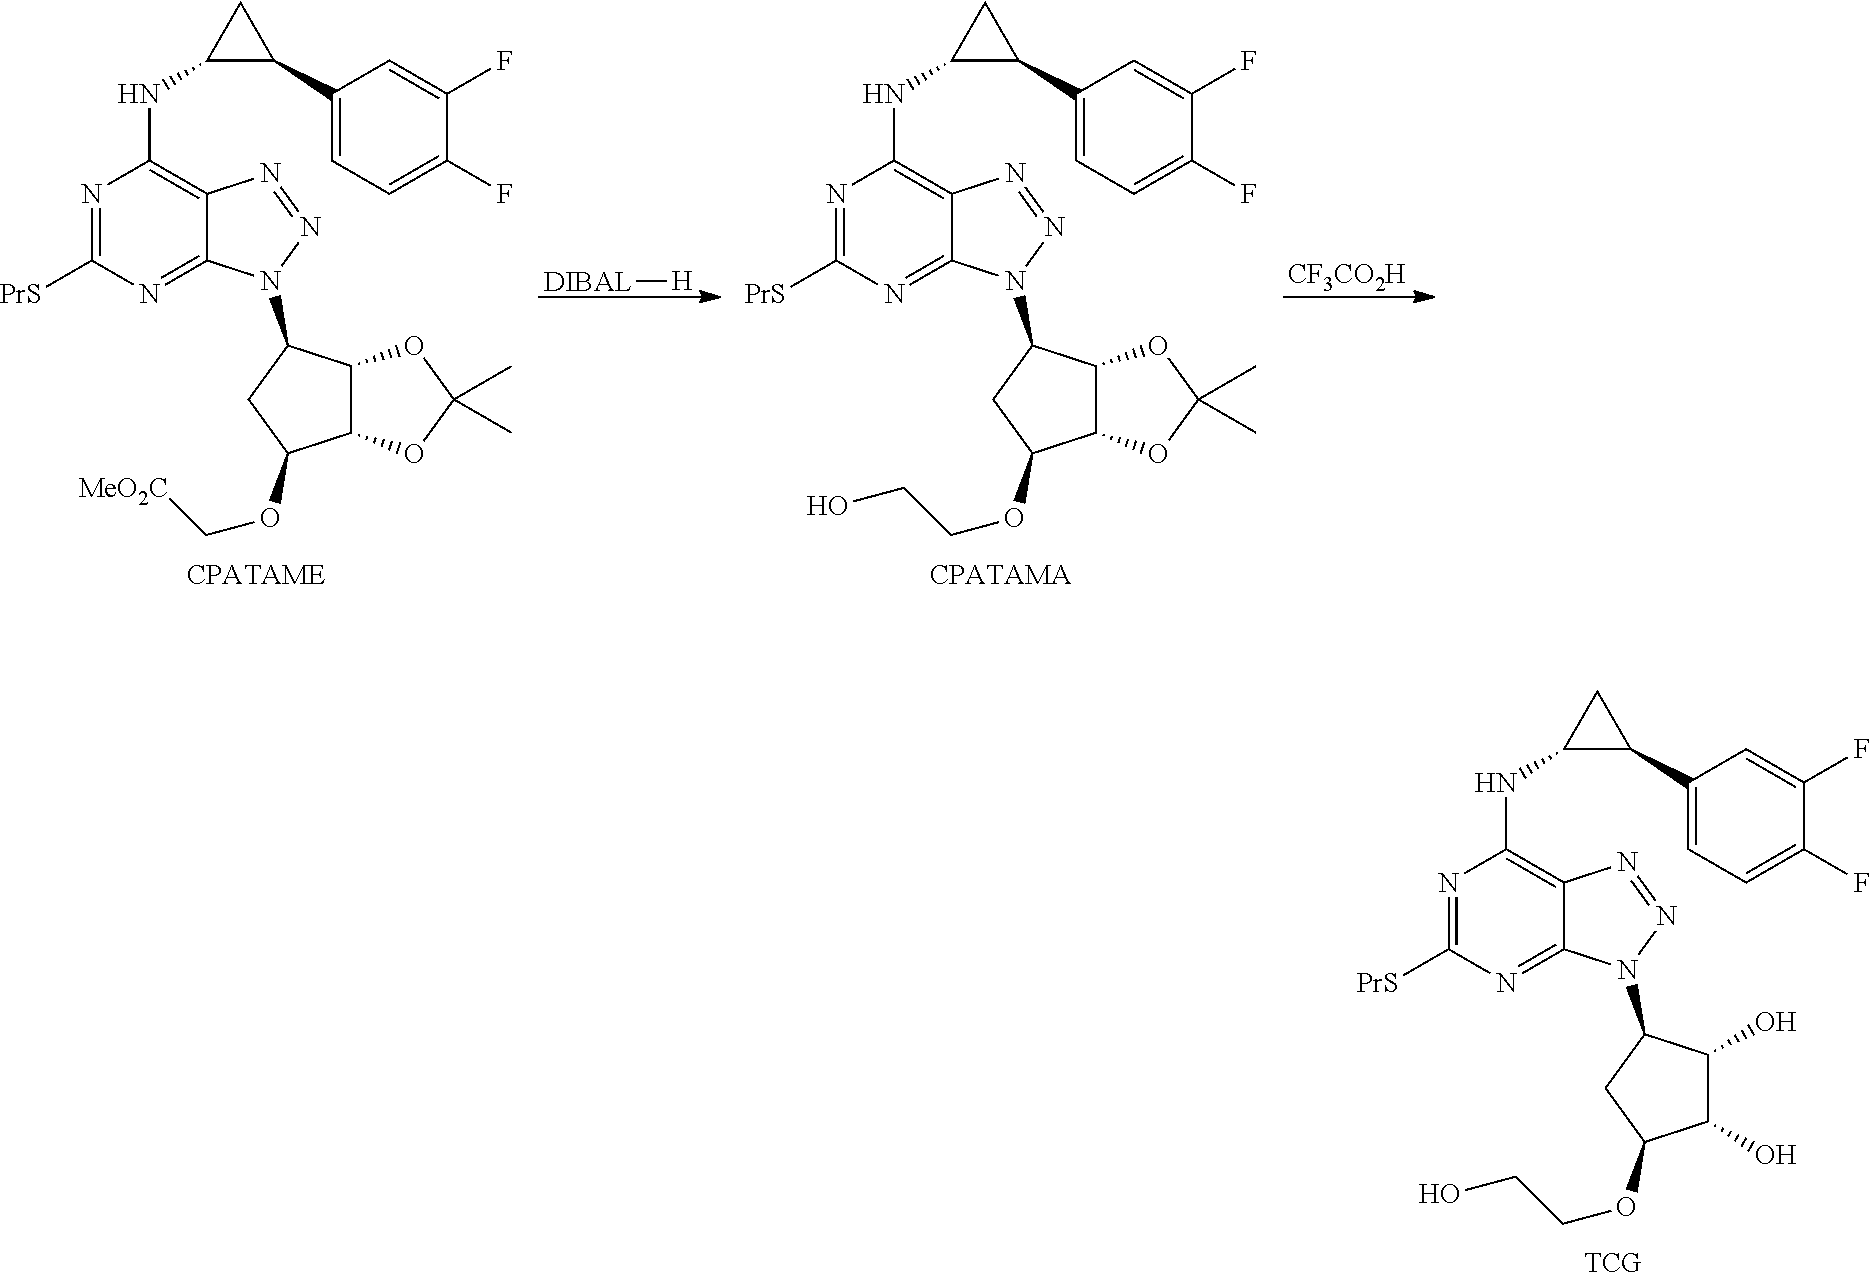 Synthesis of Triazolopyrimidine Compounds